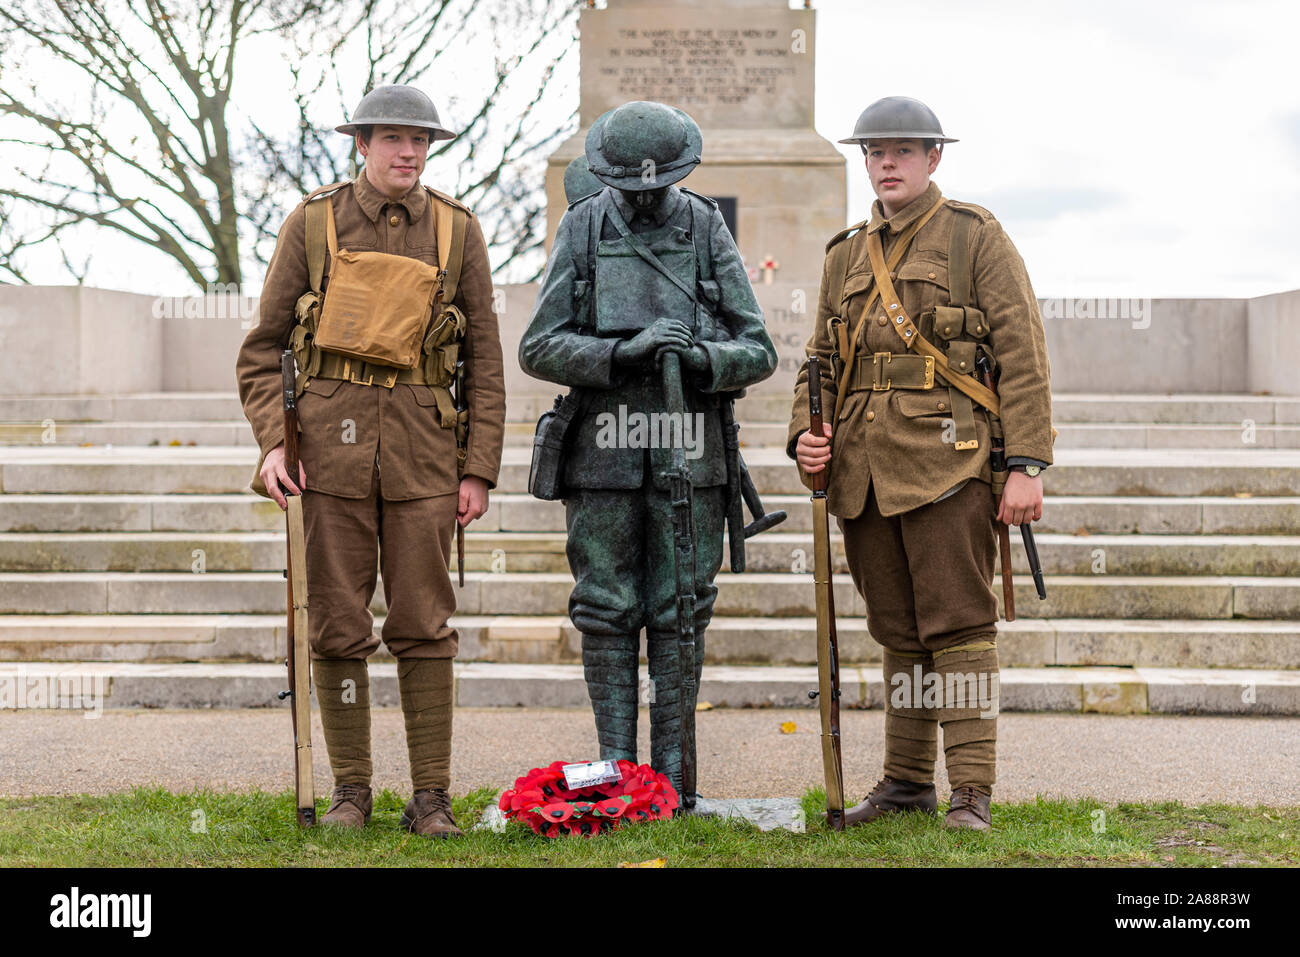 Southend Cenotaph, Southend on Sea, Essex, UK. A bronze statue of a British ‘Tommy’ soldier has been unveiled in front of the Lutyens designed war memorial in preparation for Remembrance Sunday. The statue has been created by local artist and sculptor Dave Taylor using young WWI re-enactor Ethan Harvey (left of statue) as a model to create a faithful replica of what a soldier would look like on the first day of the Battle of the Somme. Ethan's brother Reuben also attended in uniform Stock Photo